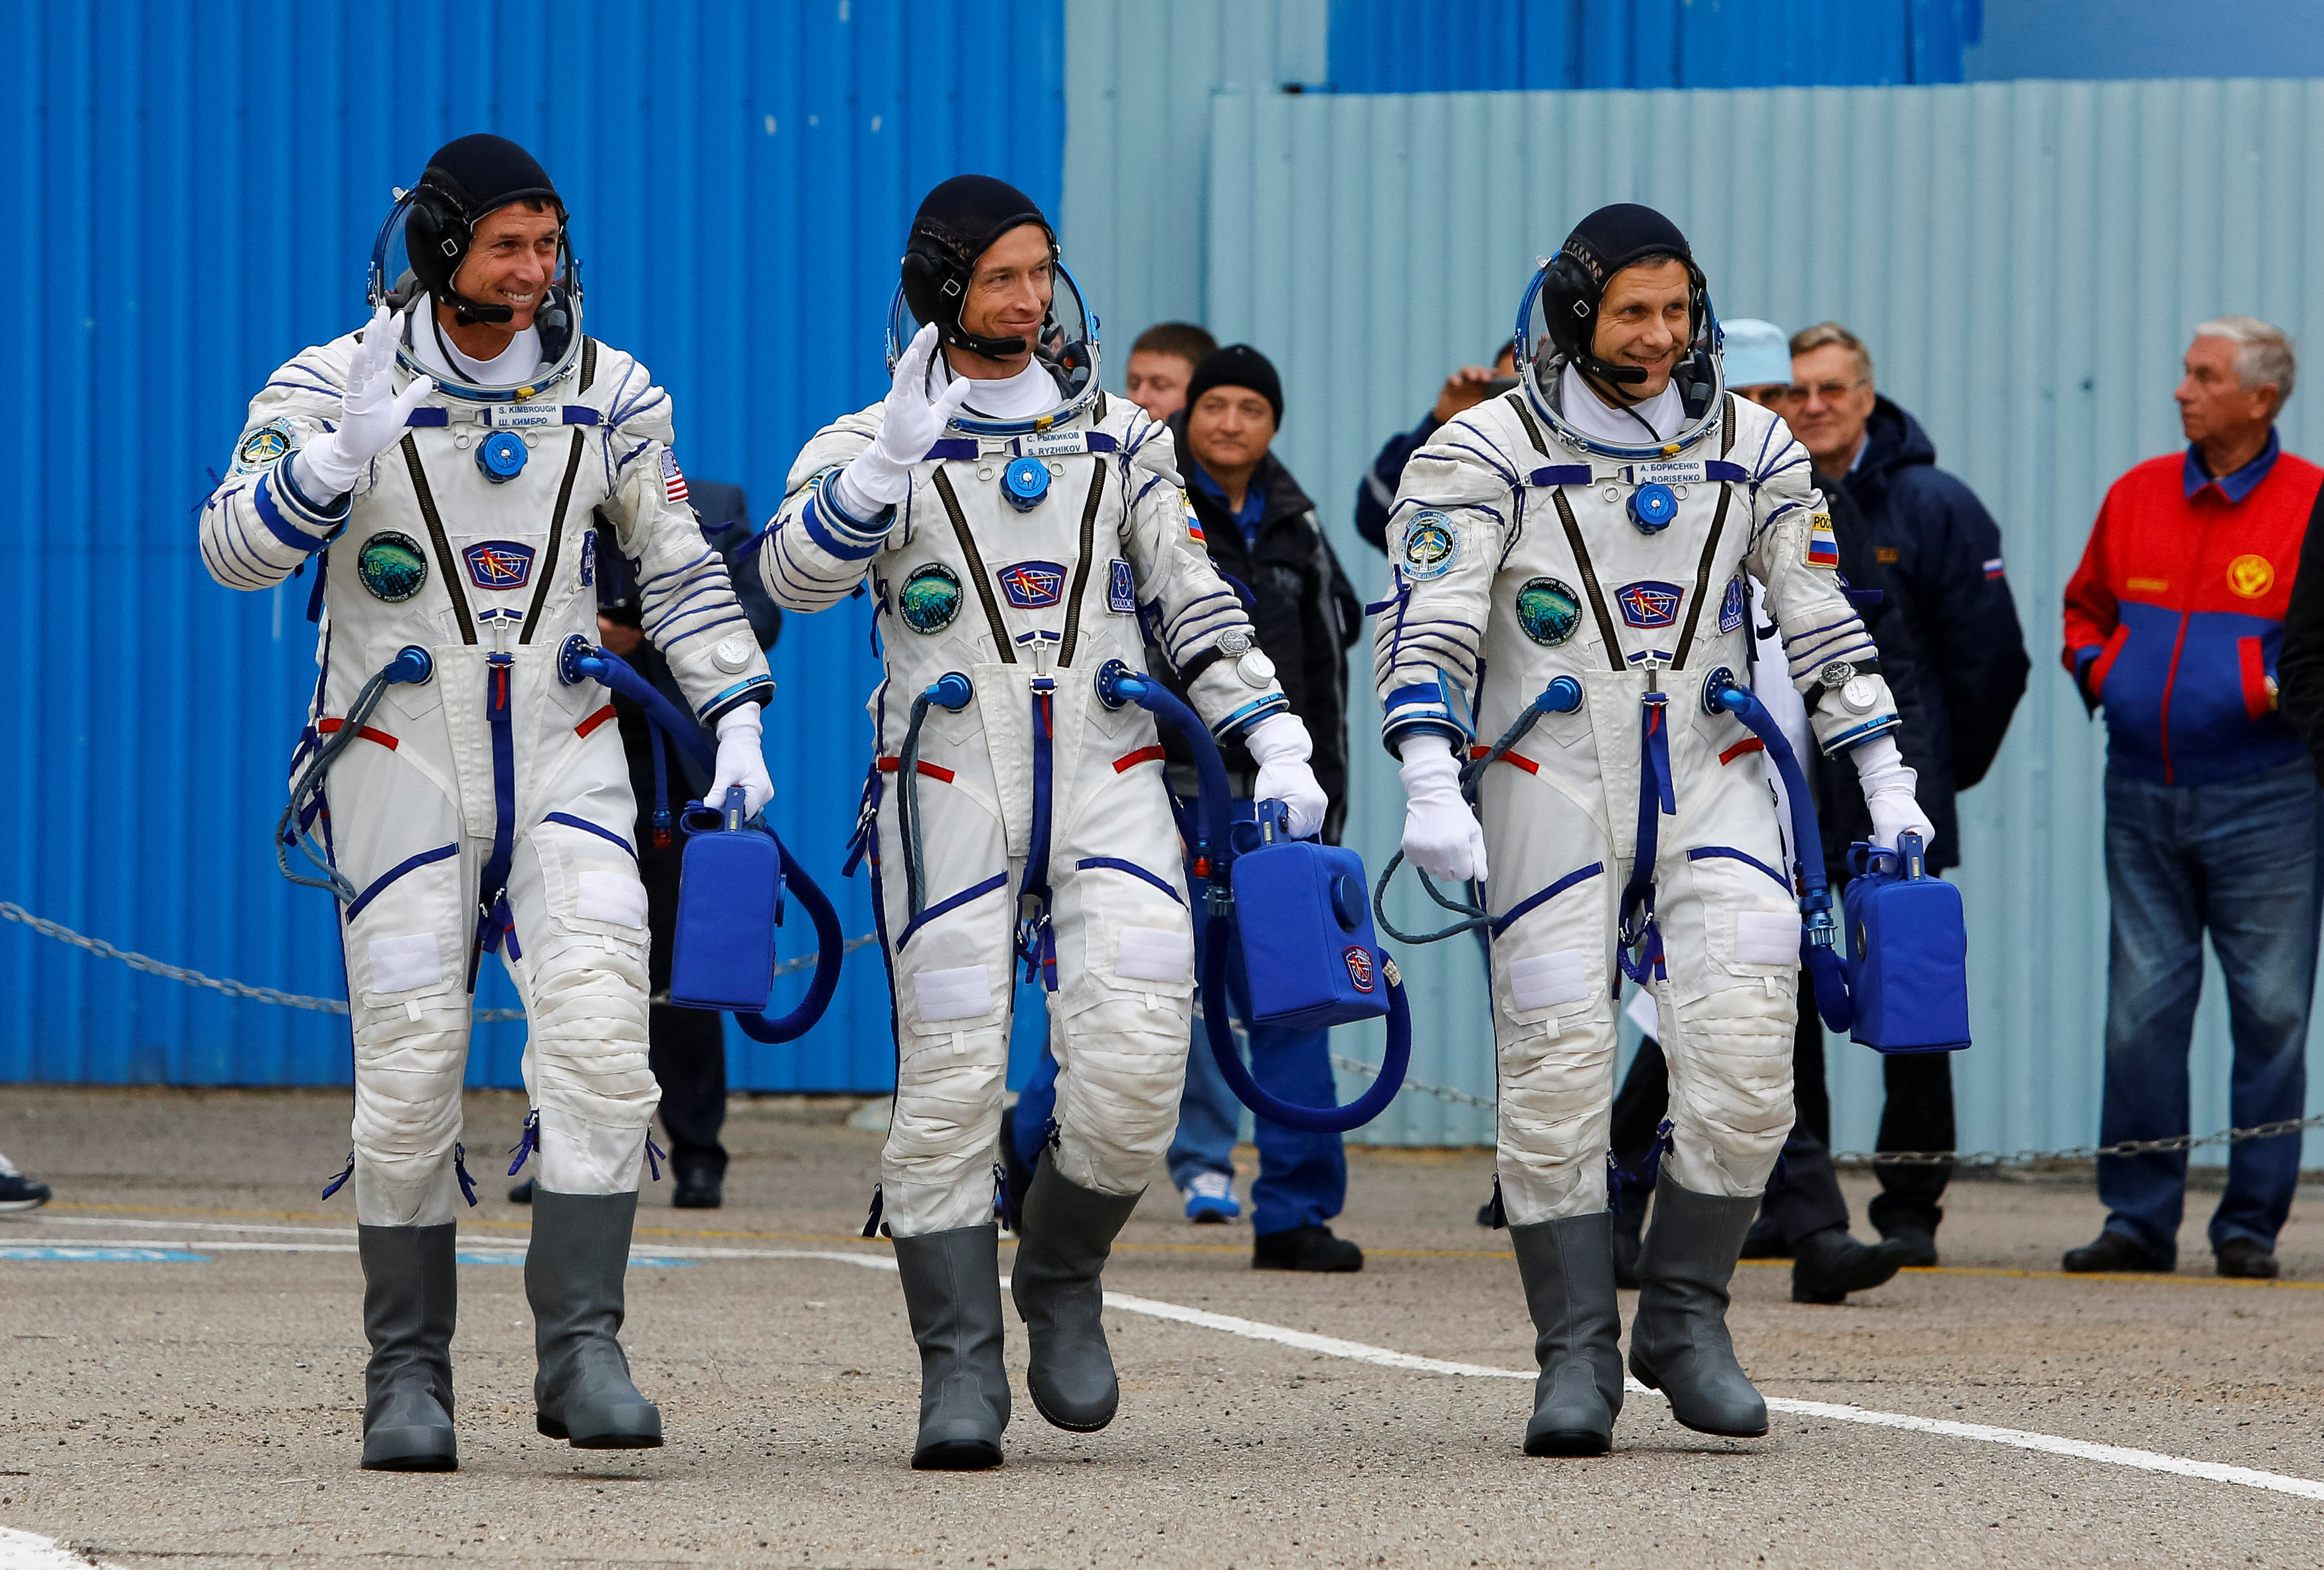 The International Space Station (ISS) crew members (L to R)Shane Kimbrough of the U.S., Sergey Ryzhikov and Andrey Borisenko of Russia walk after donning space suits at the Baikonur cosmodrome, Kazakhstan, October 19, 2016.  REUTERS/Shamil Zhumatov